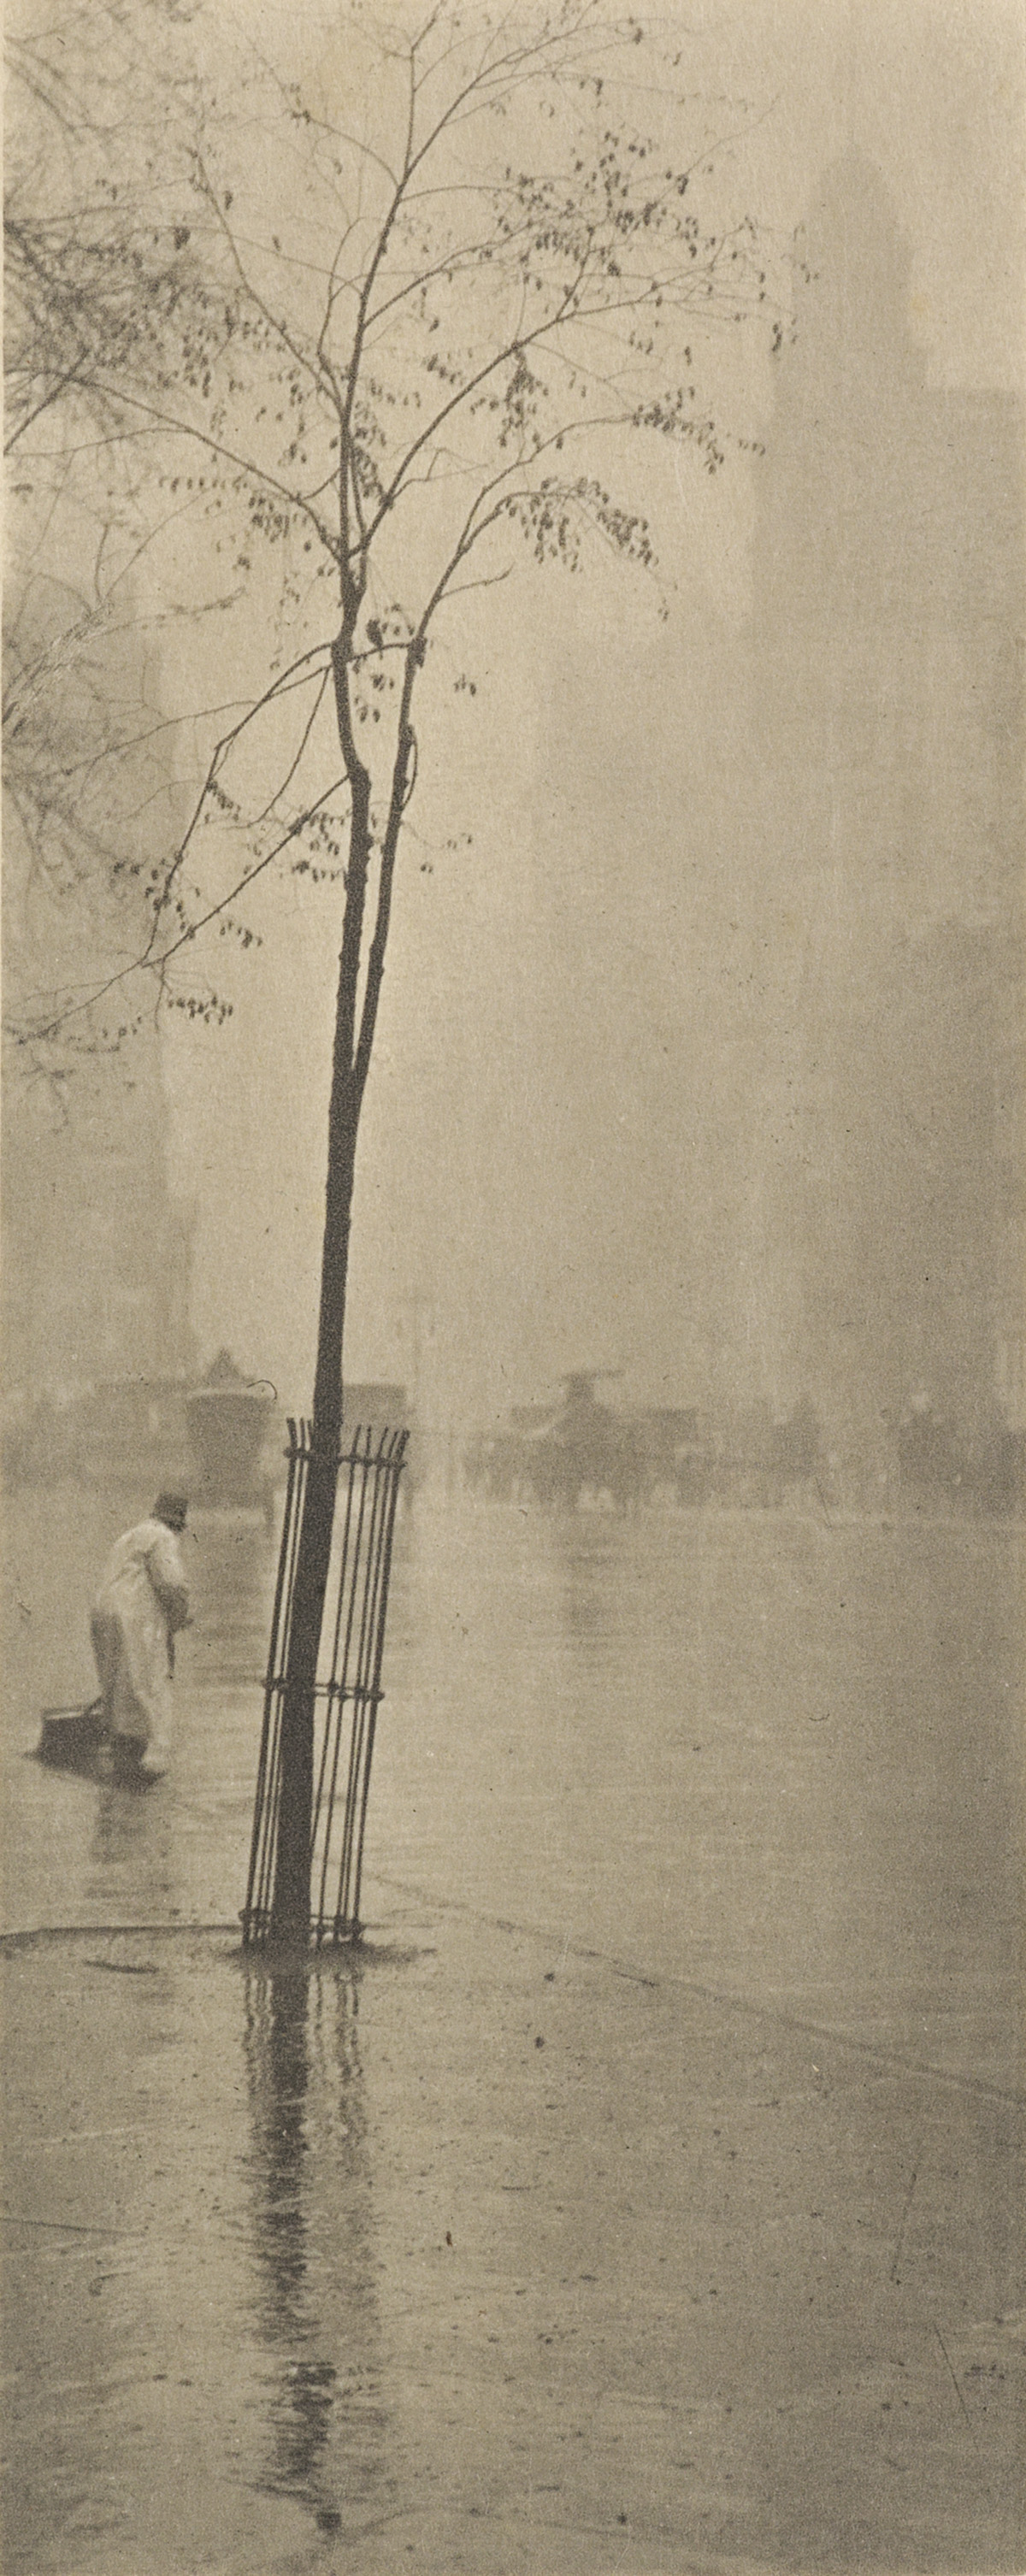 ALFRED STIEGLITZ (1864-1946) Spring Showers, from Camera Work Number 36.